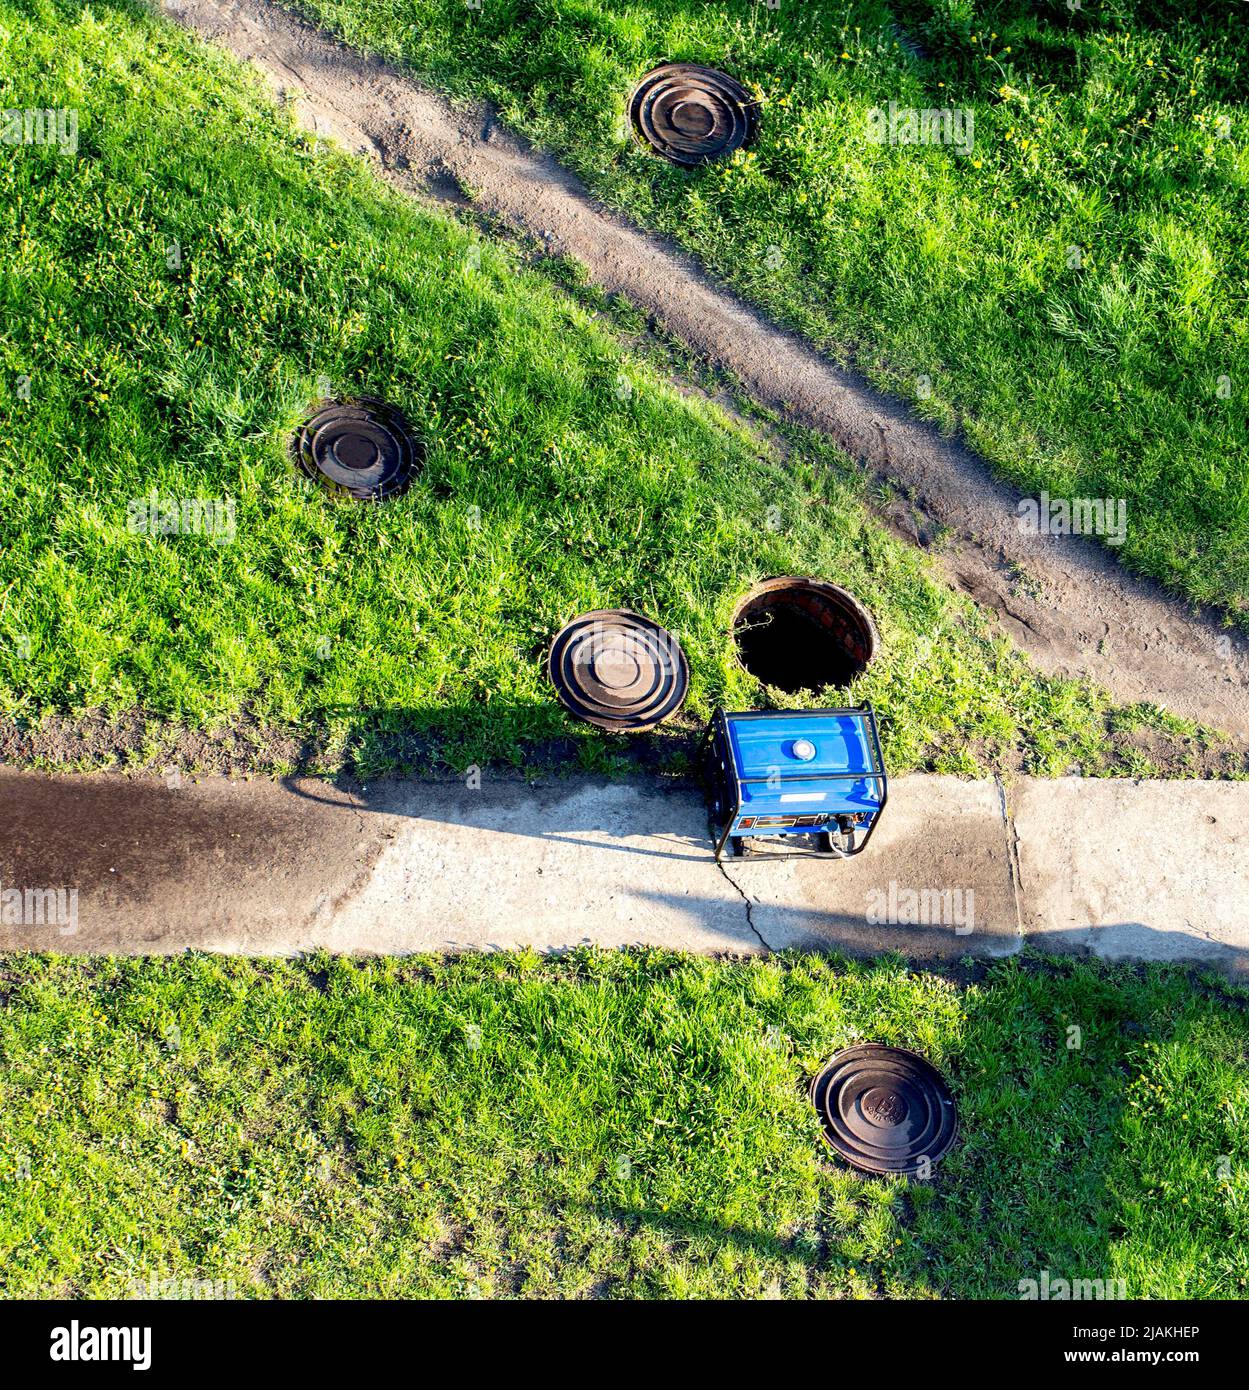 An open sewer well near which there is a gas generator on the grass. The concept of repair and maintenance of inspection and sewer wells. Accident in Stock Photo